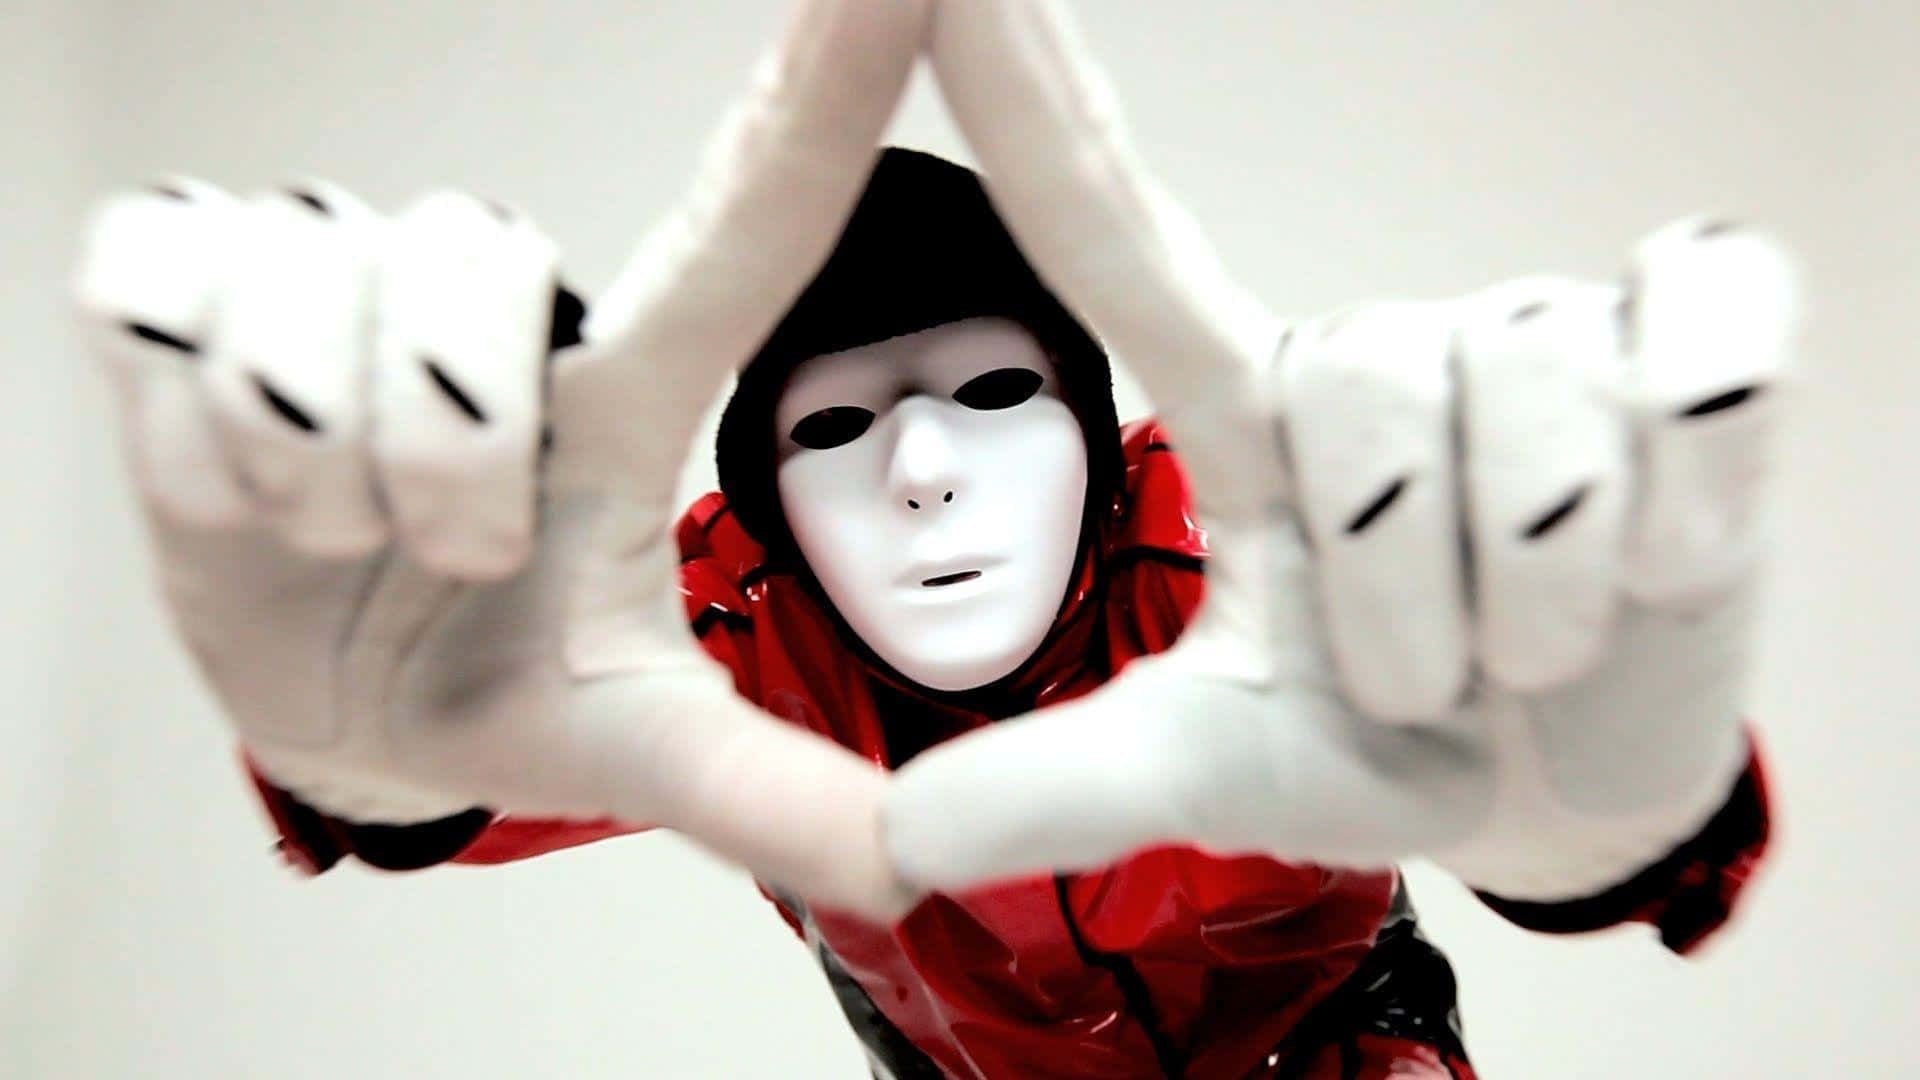 A Person In A Red Mask Making A Hand Gesture